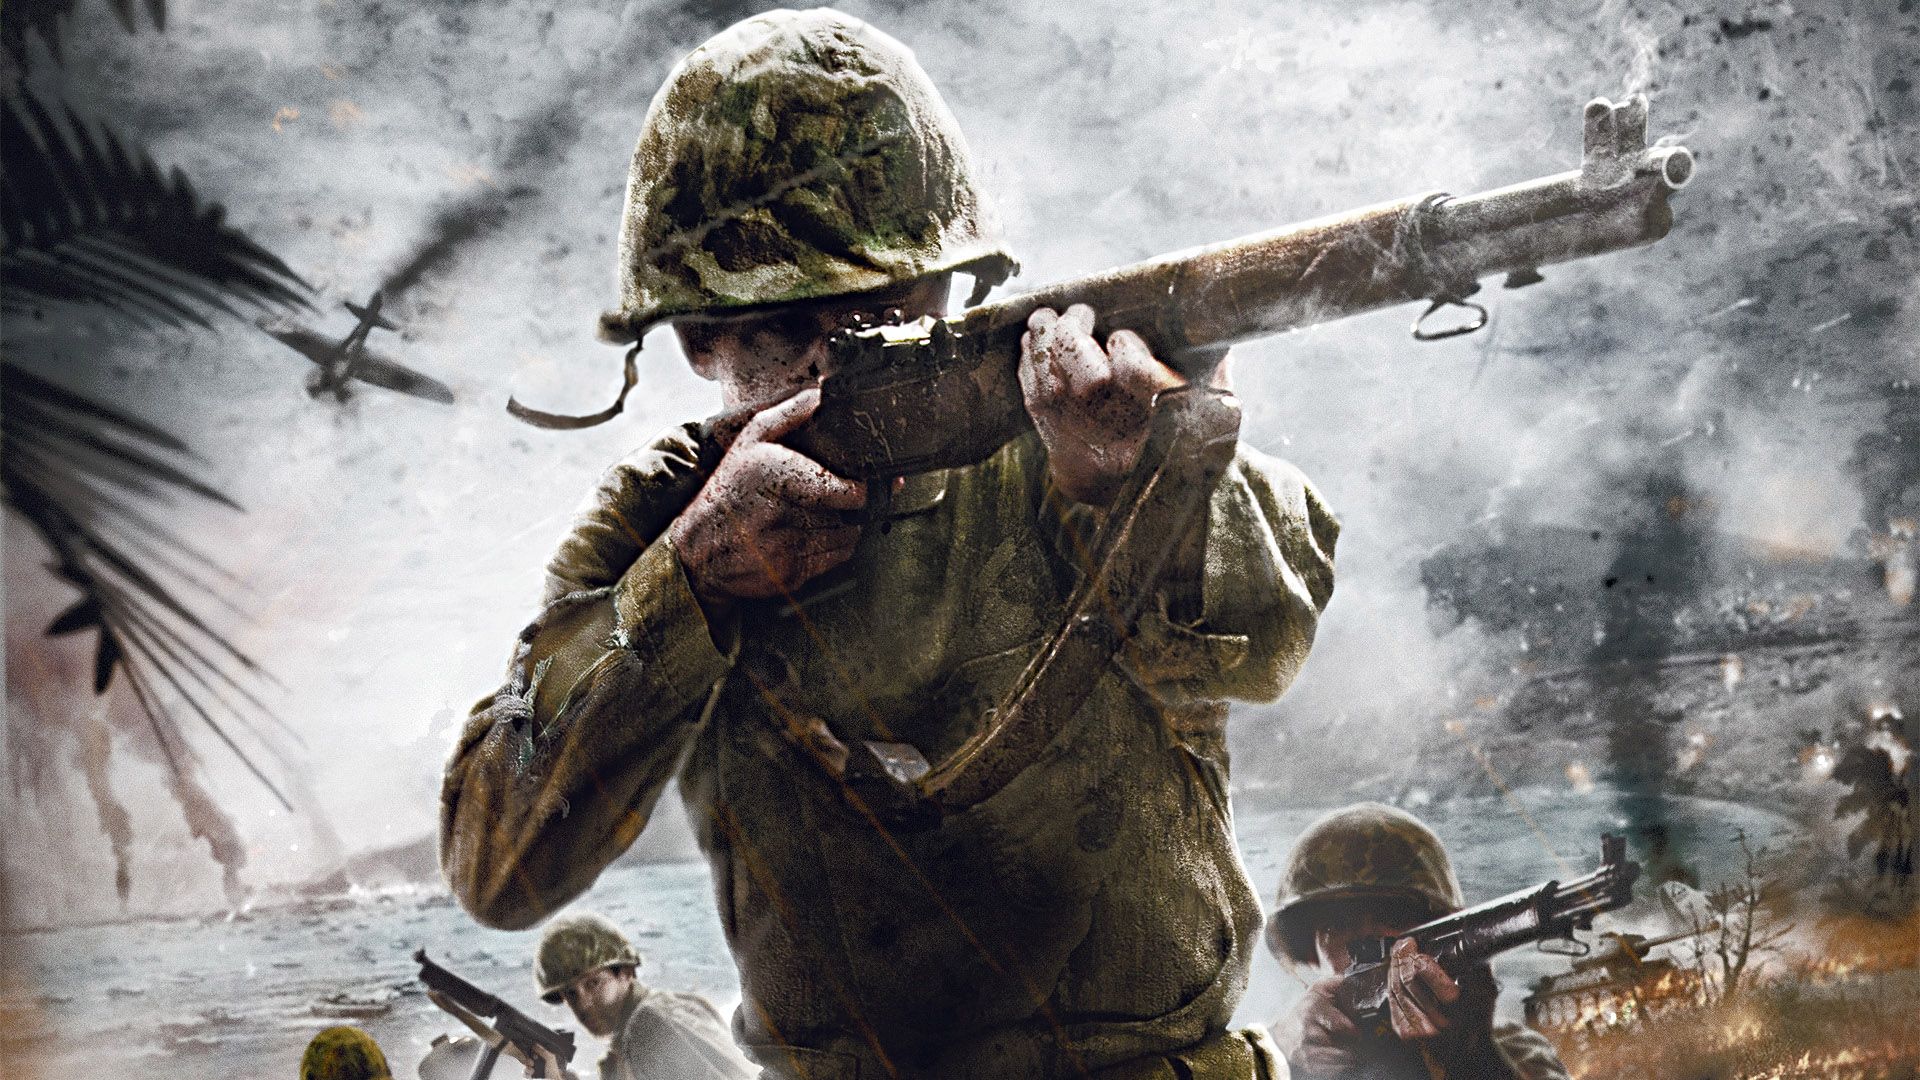 Call of Duty: WWII Wallpapers